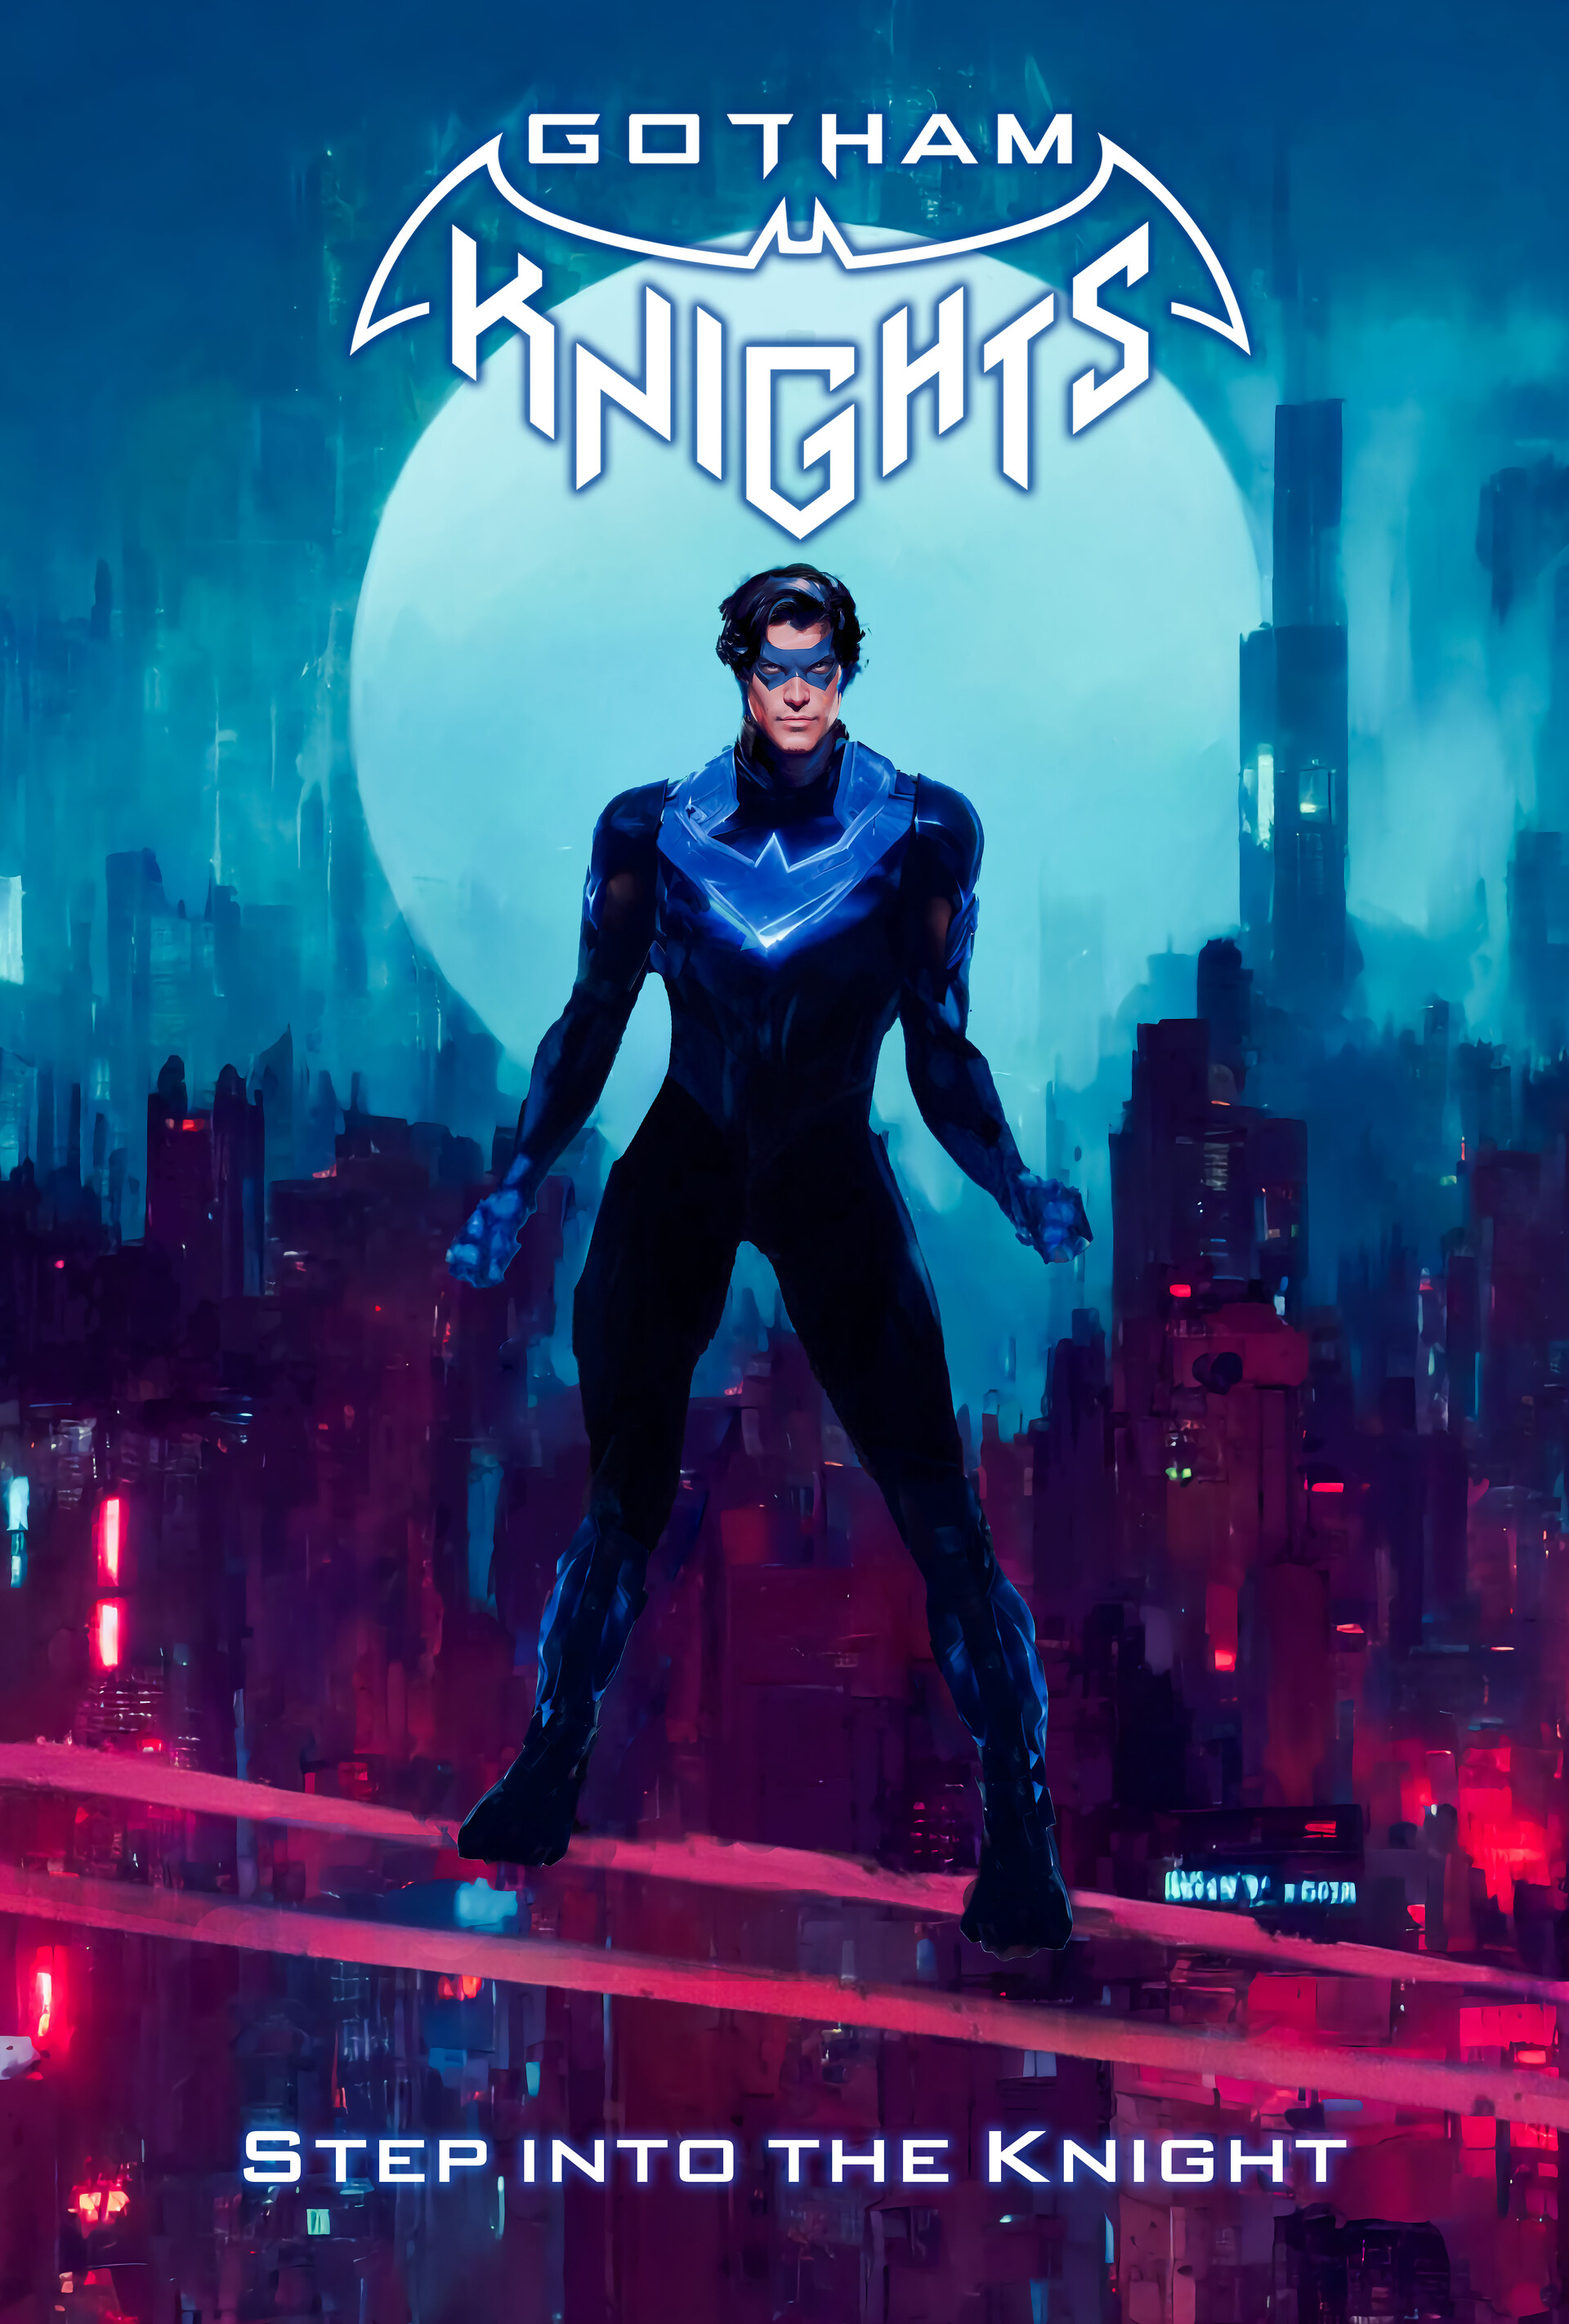 Nightwing rough concept poster